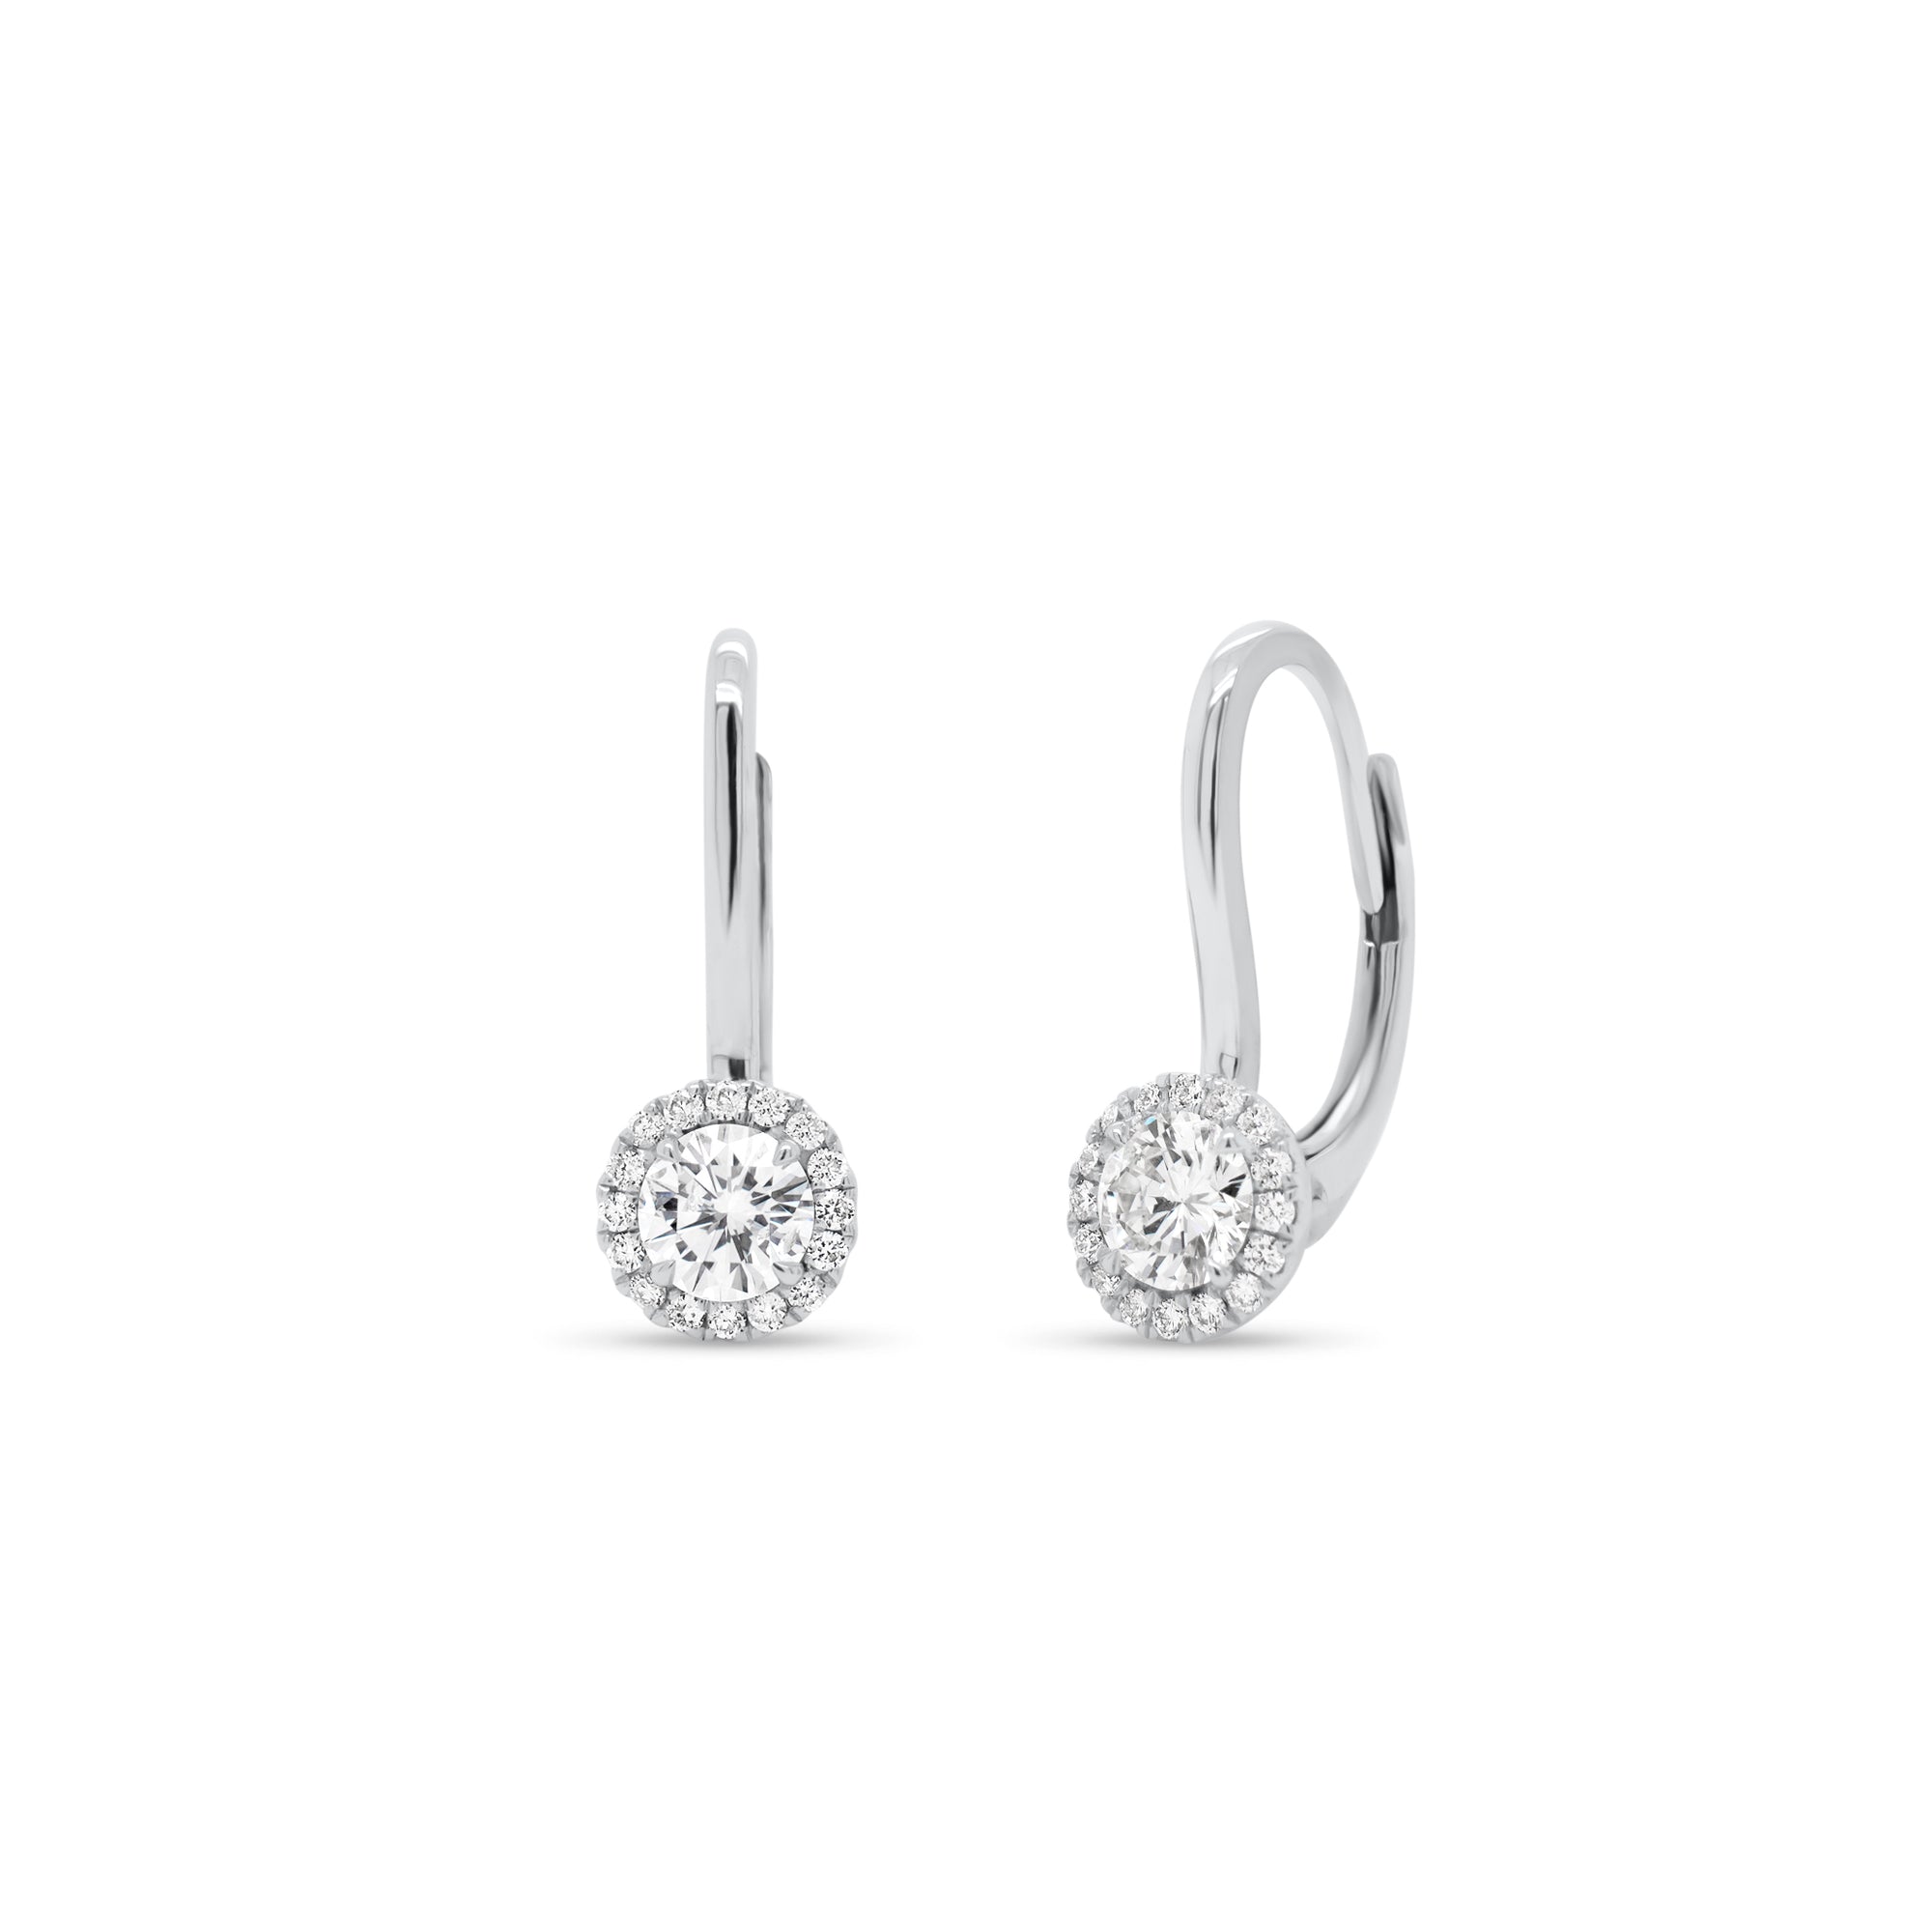 Diamond Halo Lever-Back Earrings  - 18K gold weighing 2.19 grams  - 32 round diamonds totaling 0.11 carats  - 2 round diamonds totaling 0.46 carats